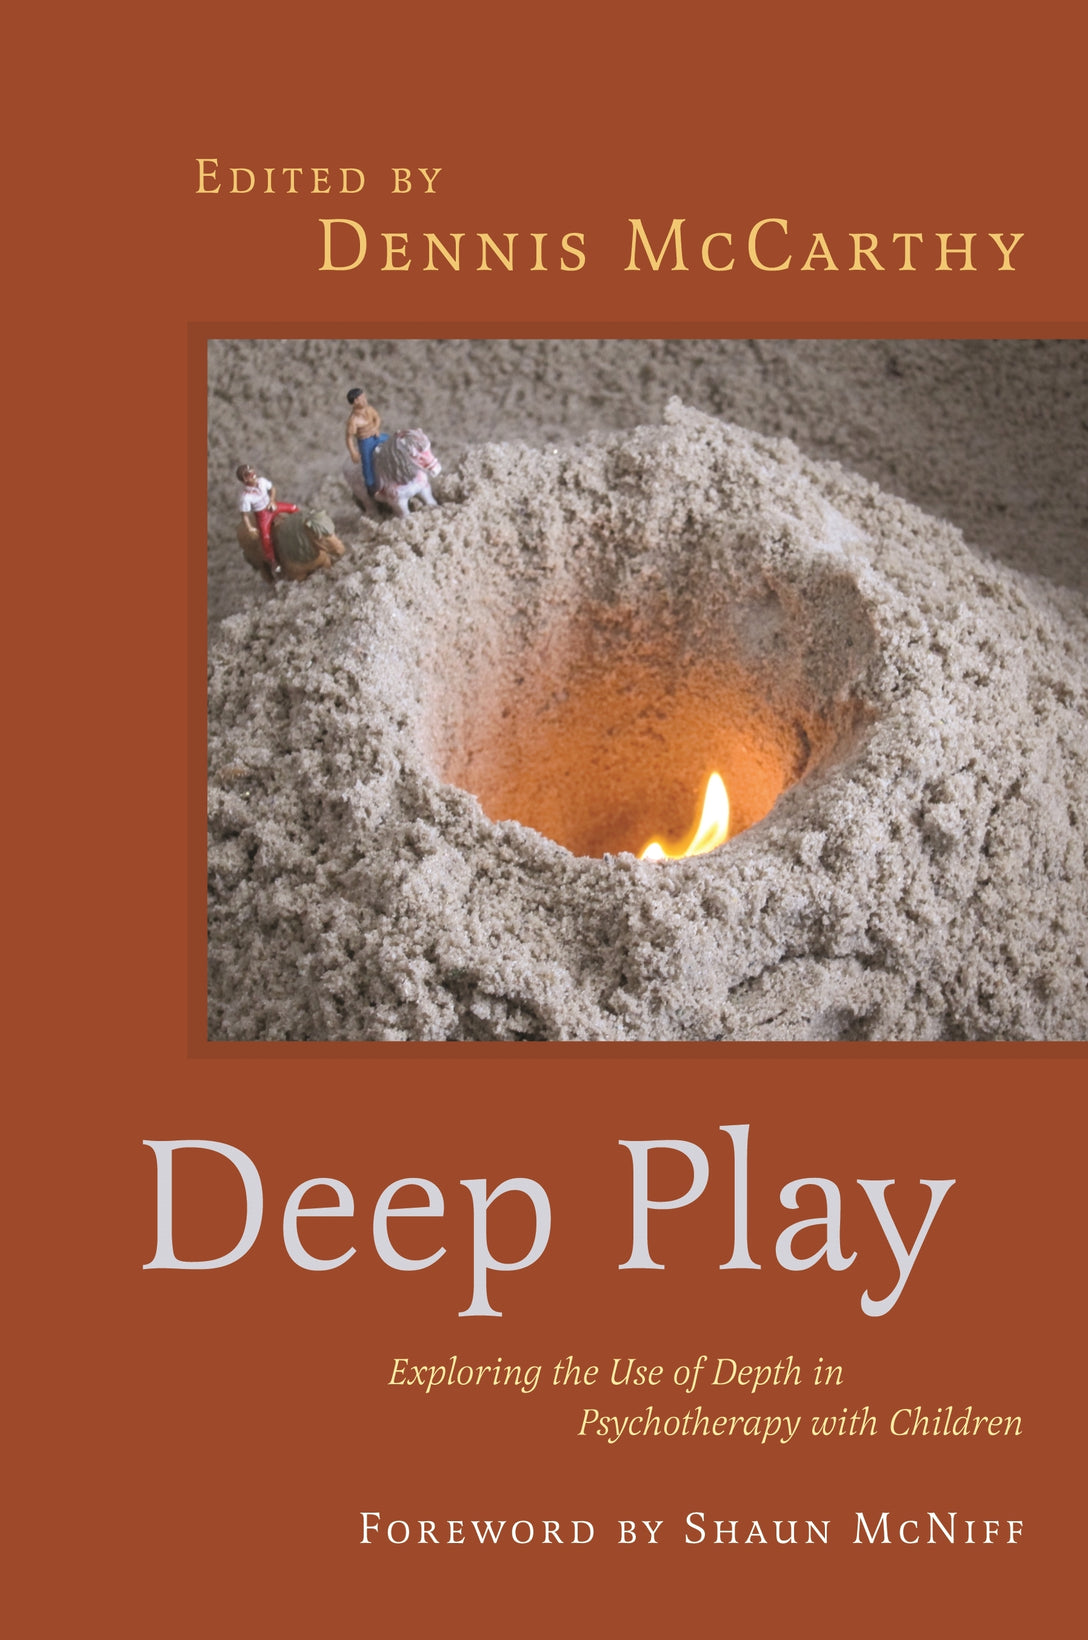 Deep Play - Exploring the Use of Depth in Psychotherapy with Children by Dennis McCarthy, Shaun McNiff, No Author Listed